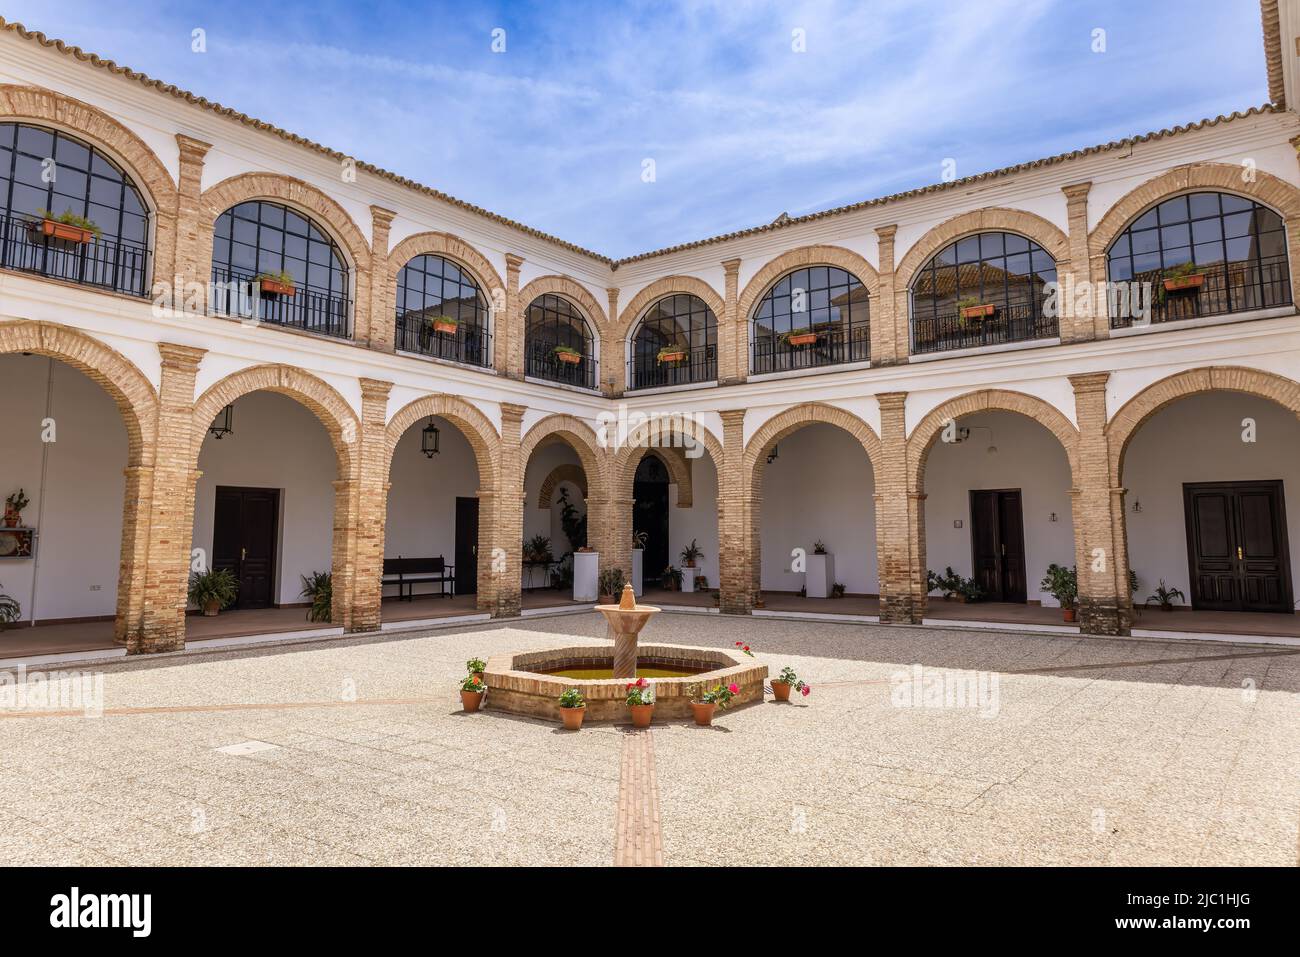 Entrance of El Convento del Carmen, former Consolación convent occupied by Carmelite religious, has its origins in the first quarter of the 16th centu Stock Photo